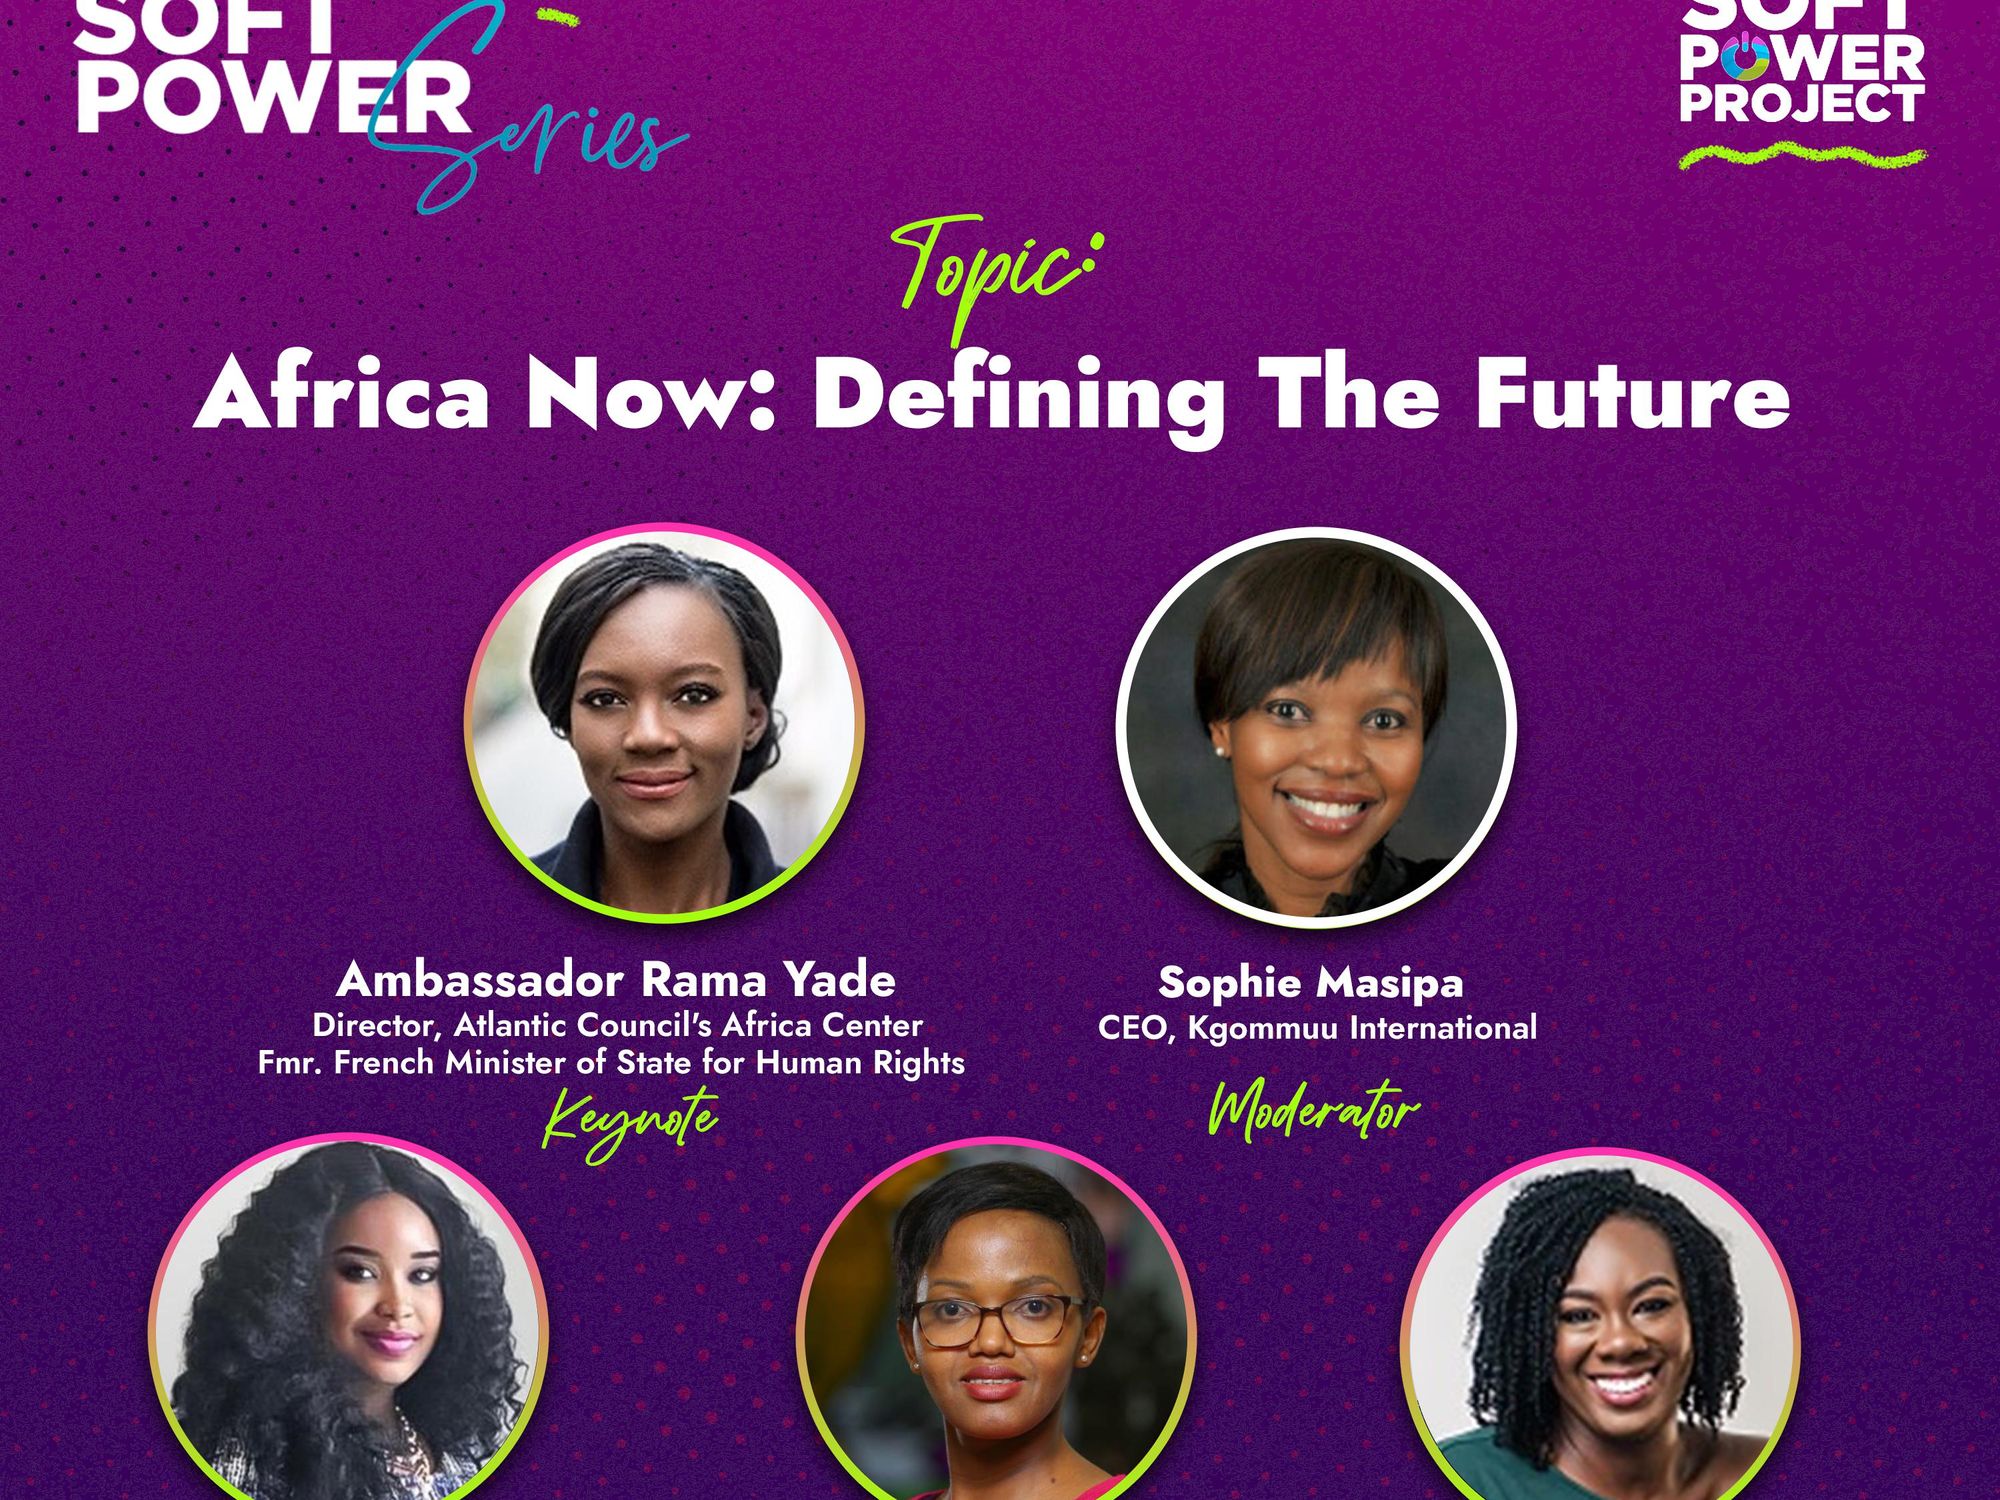 A poster of The Africa Soft Power Series 2021 virtual summit